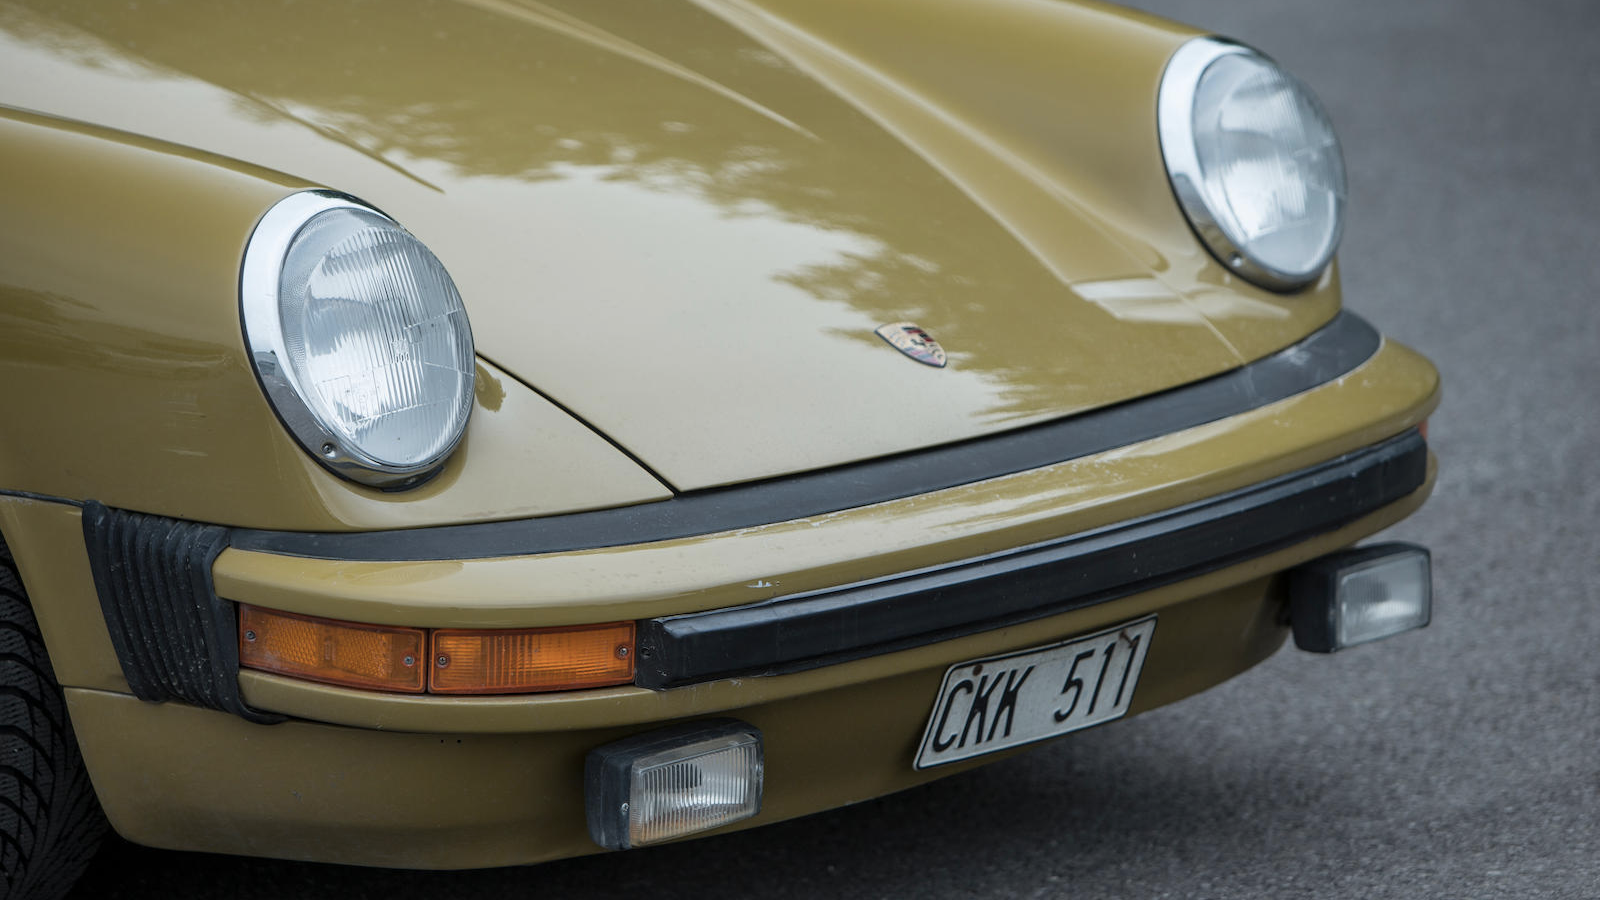 The Porsche 911S from The Bridge is being auctioned for charity